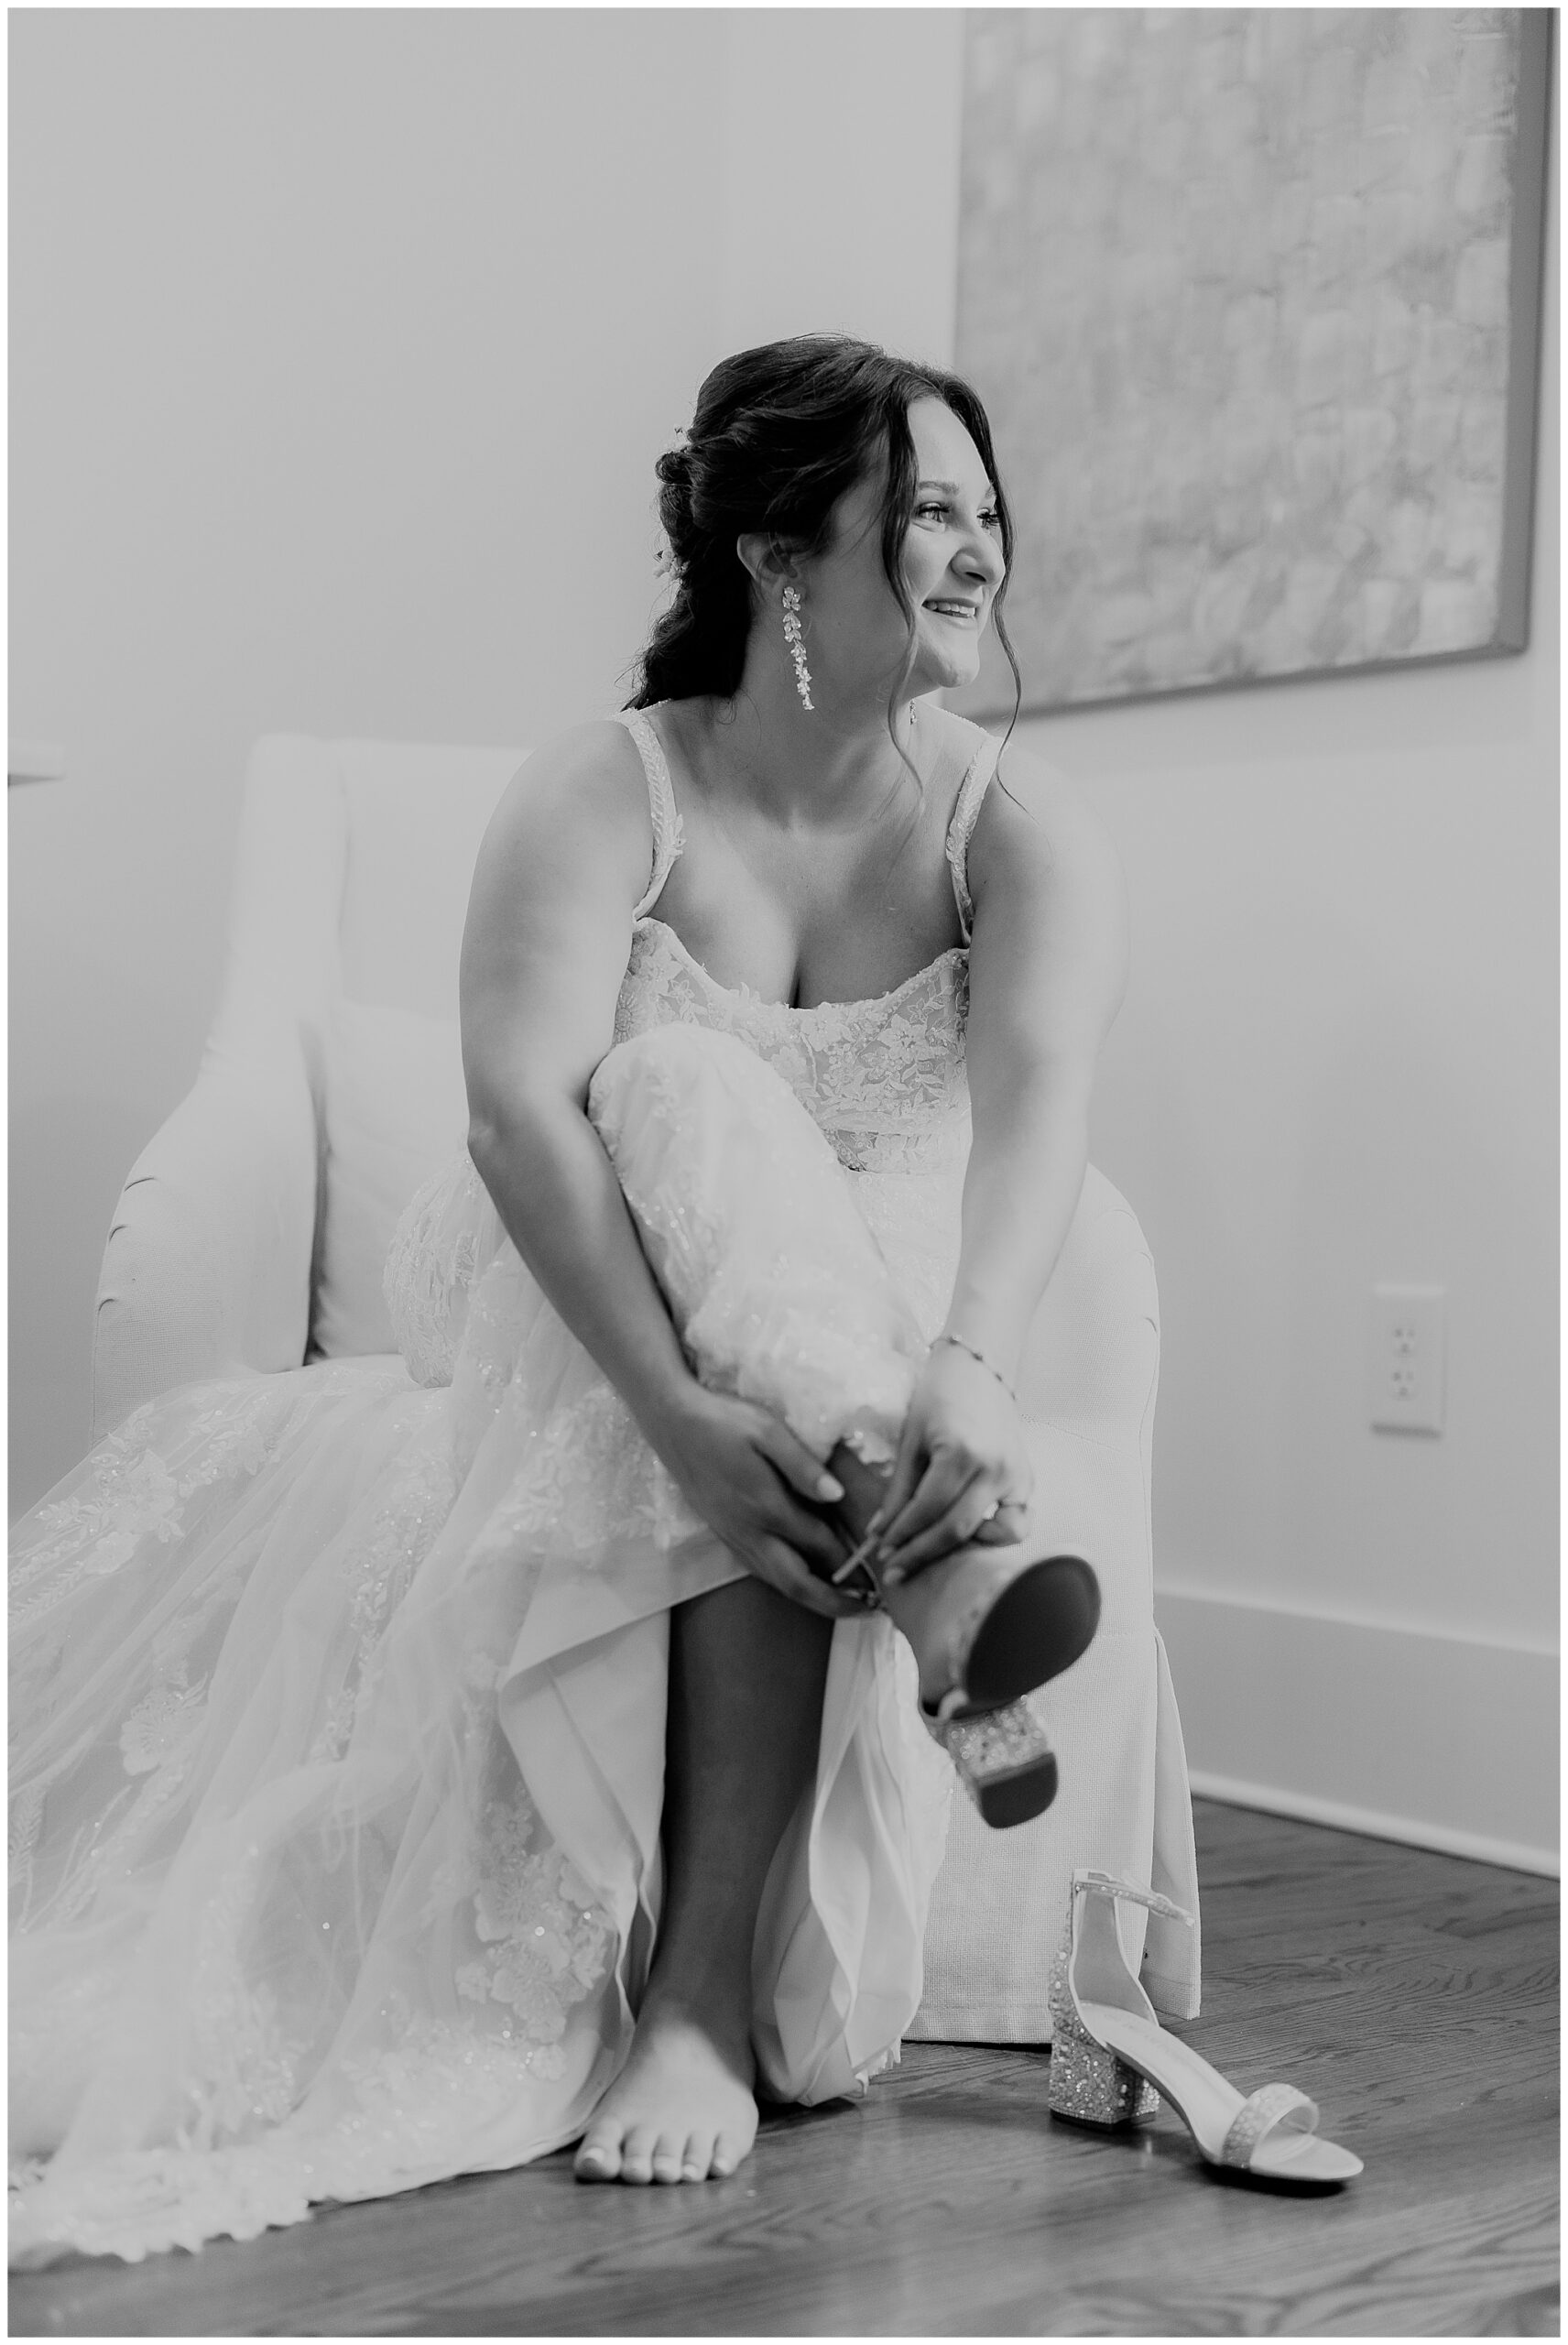 Bride in a white lace dress sits on a white chair while strapping on her diamond-encrusted heels